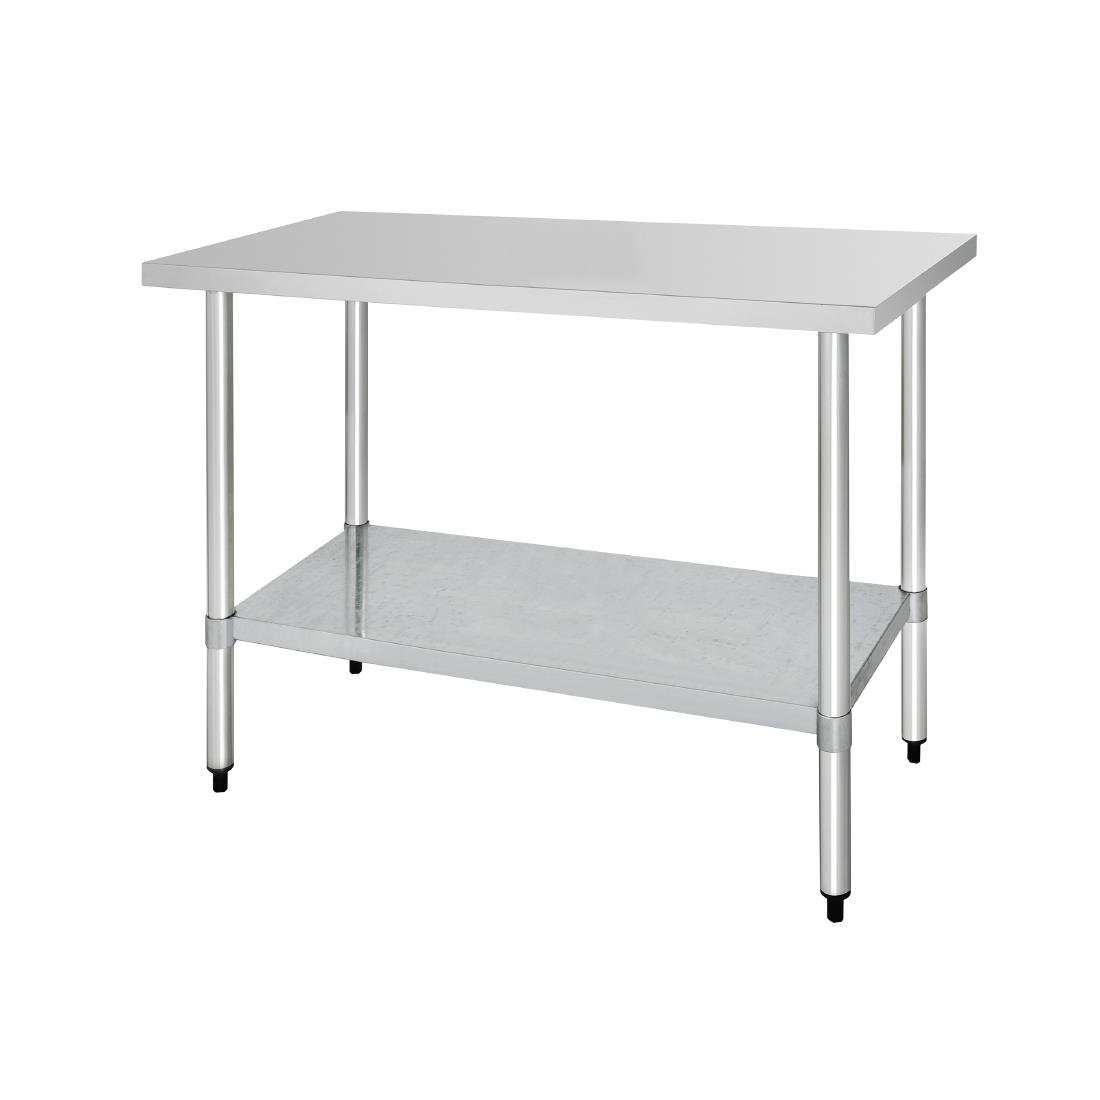 Vogue Stainless Steel Prep Table 1500mm (900(H) x 1500(W) x 700(D)mm)